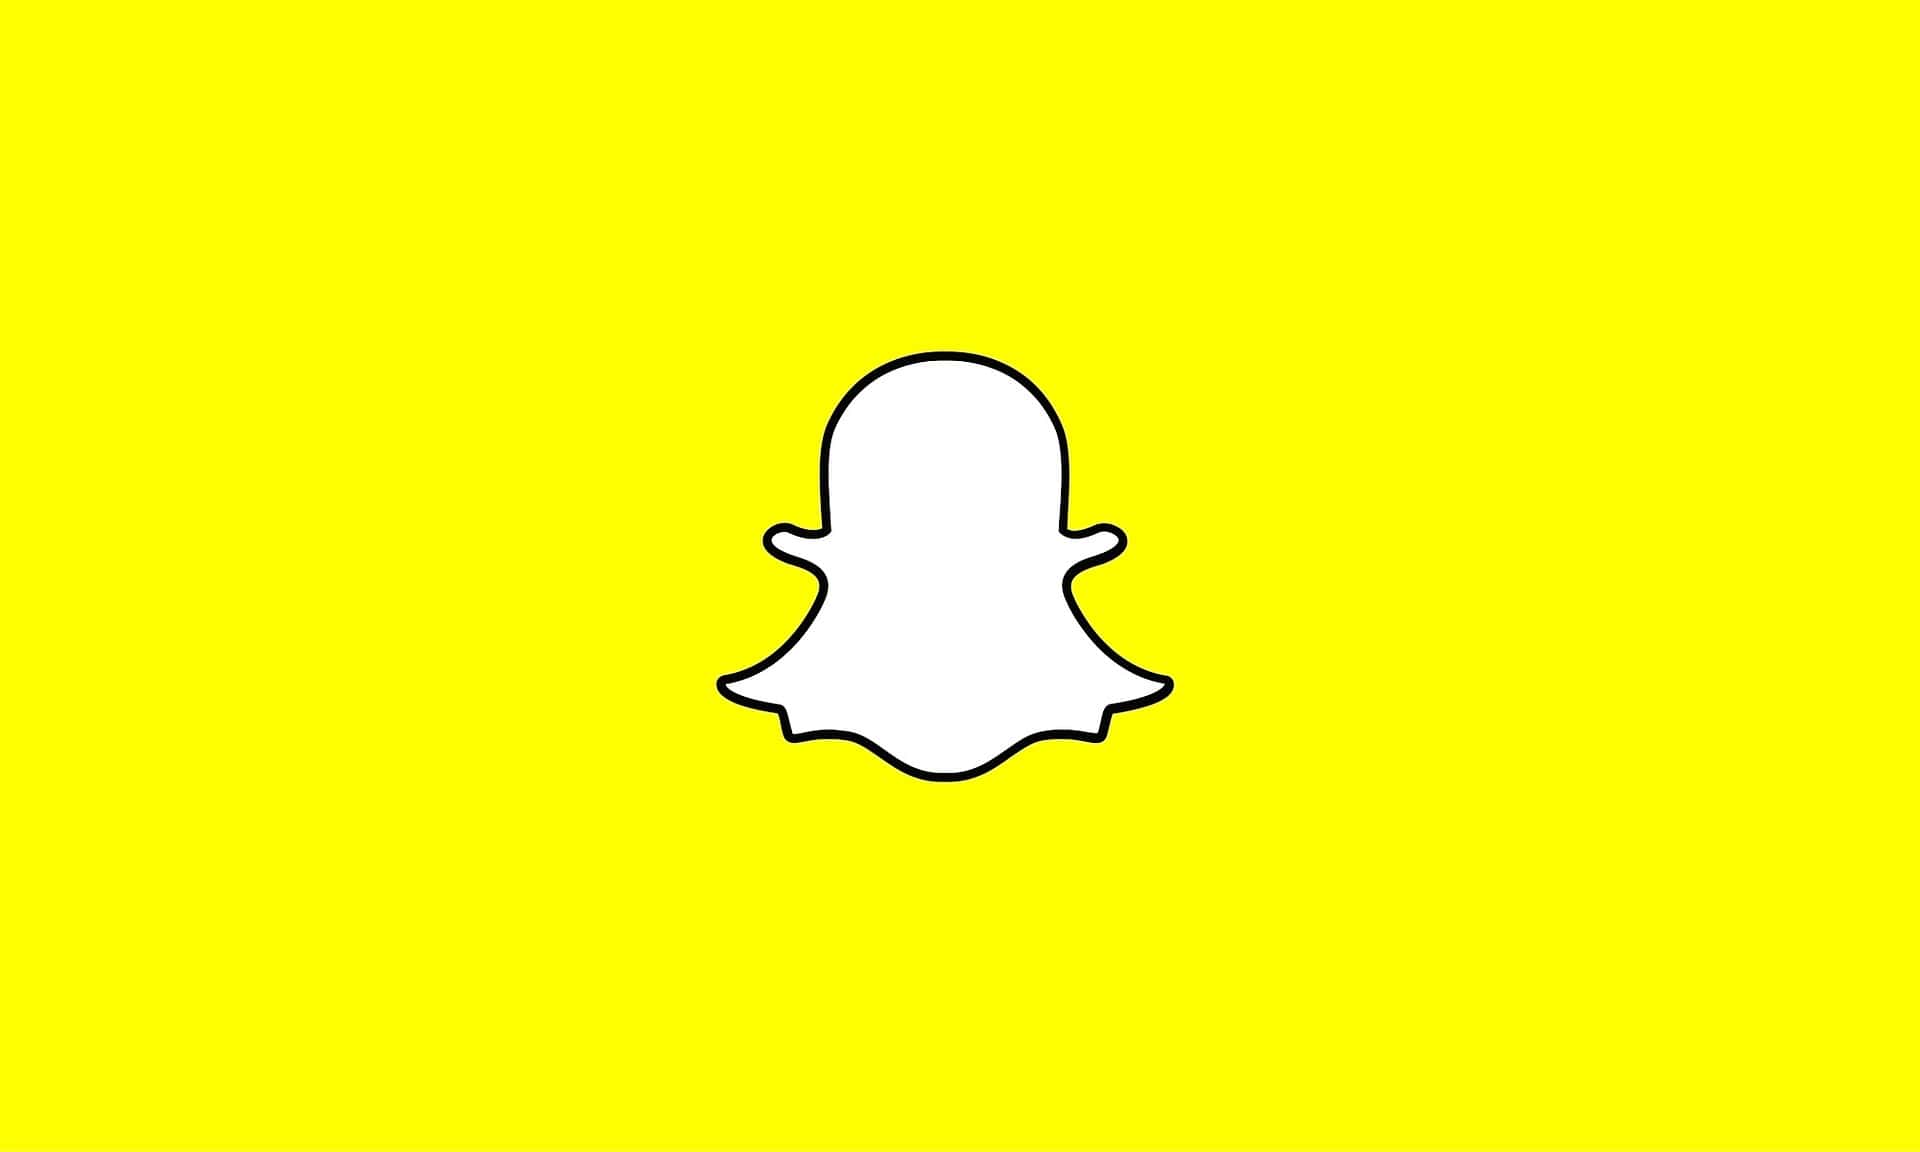 3 Snapchat Campaigns powered by Augmented Reality